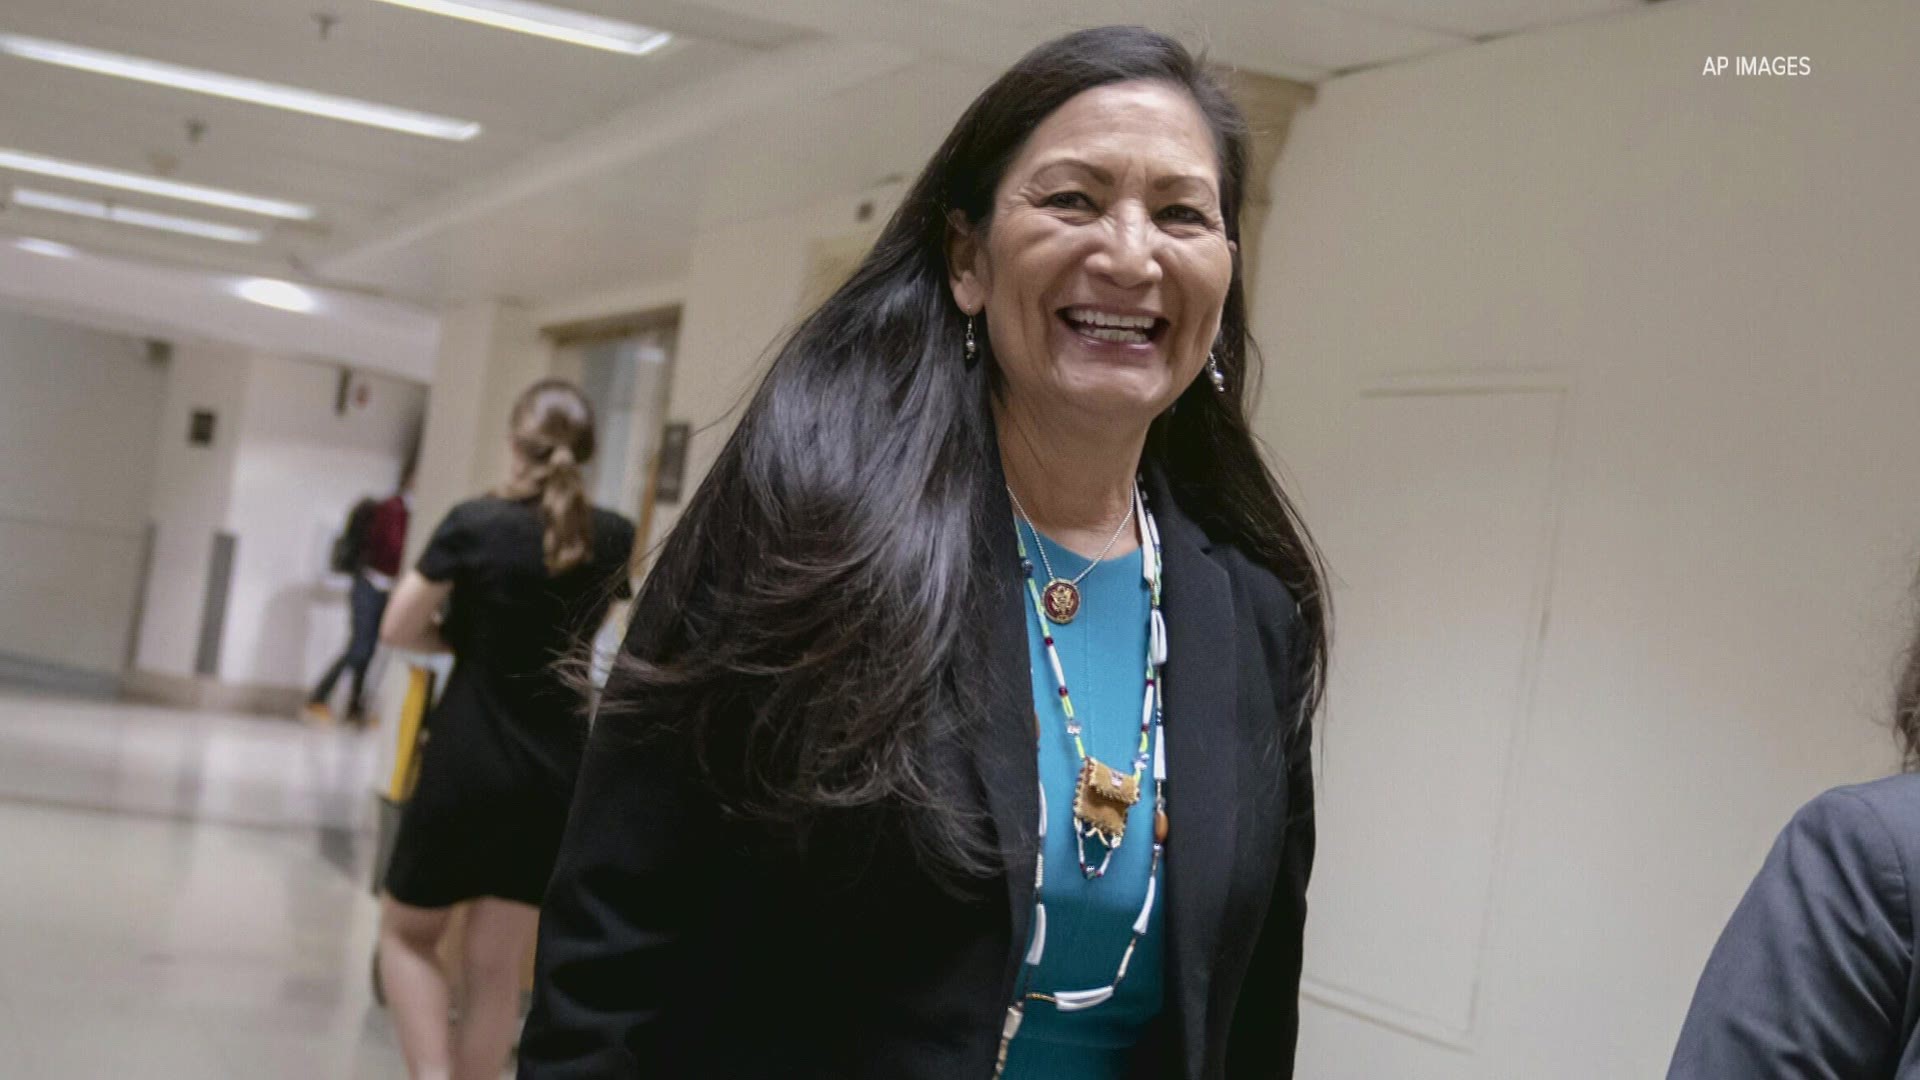 Sally Jewell, former U.S. Interior Secretary who lives in the Seattle area, said Haaland stepping in to the new role is huge, especially for tribal communities.